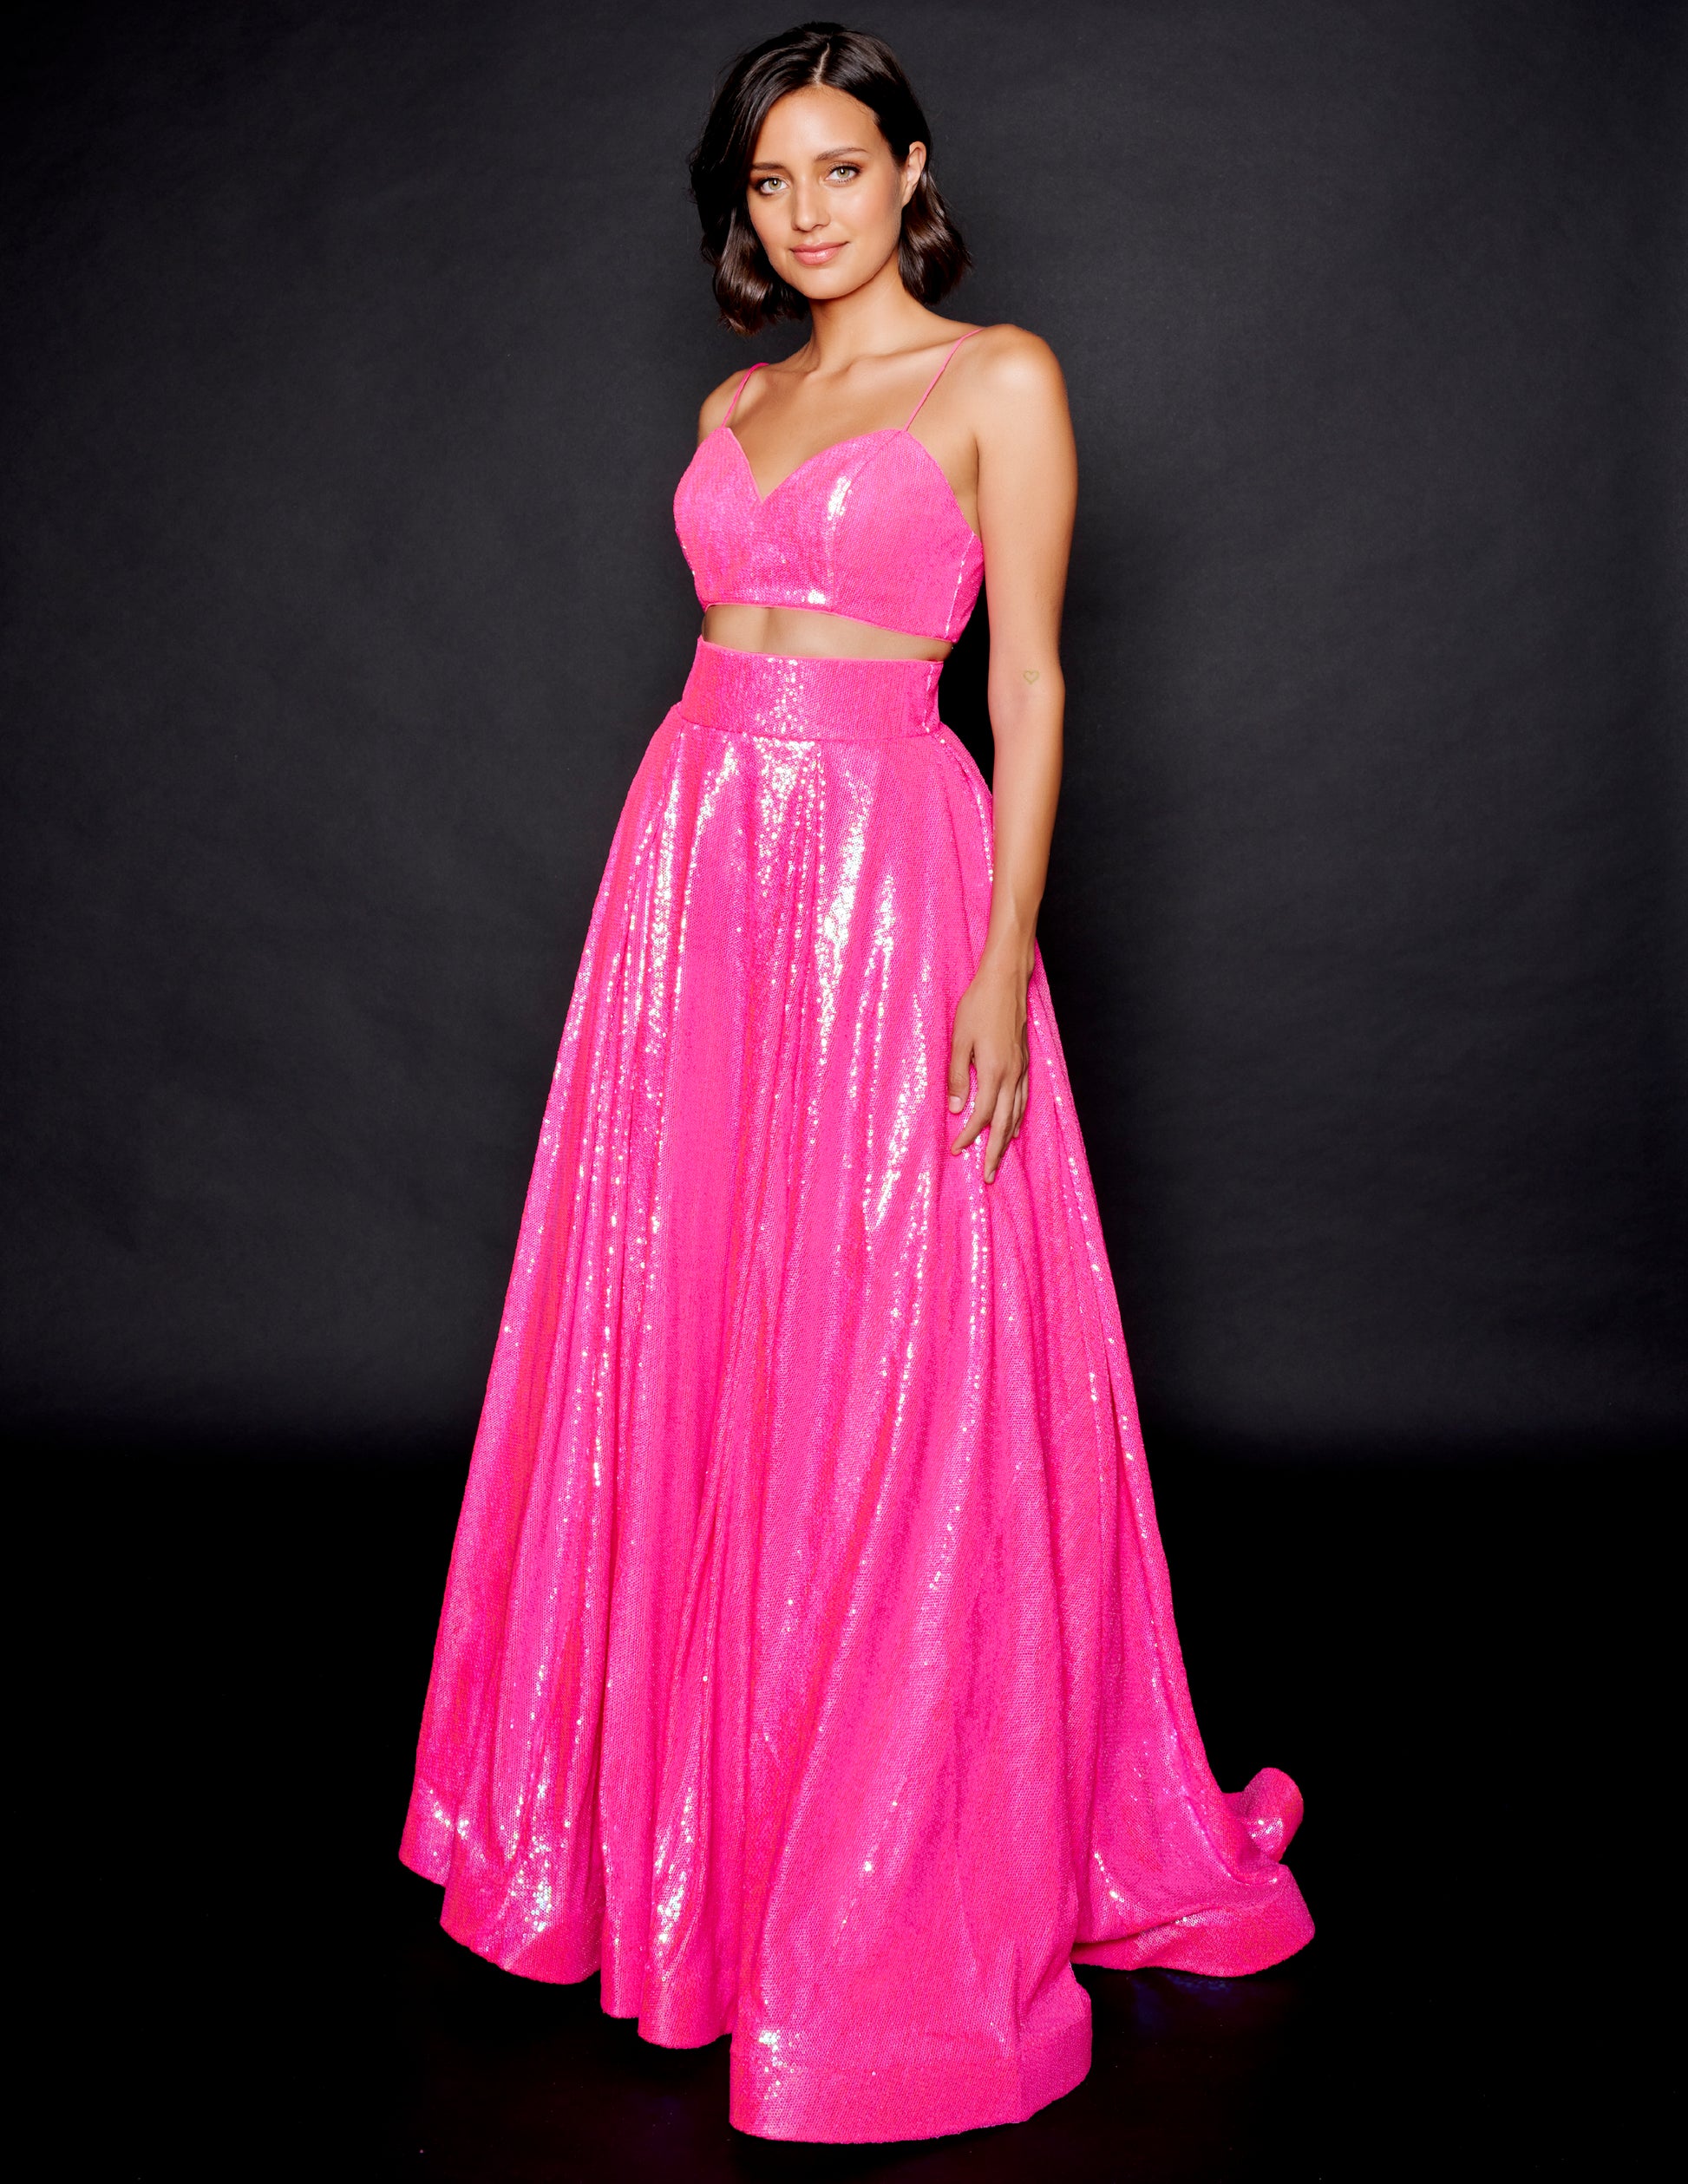 Nina Canacci 1542 Fuchsia Prom Dress  This is a two piece prom ballgown with sweetheart neckline with spaghetti straps on the cropped top.  It has a high waisted floor length A Line skirt with a wide waistband.